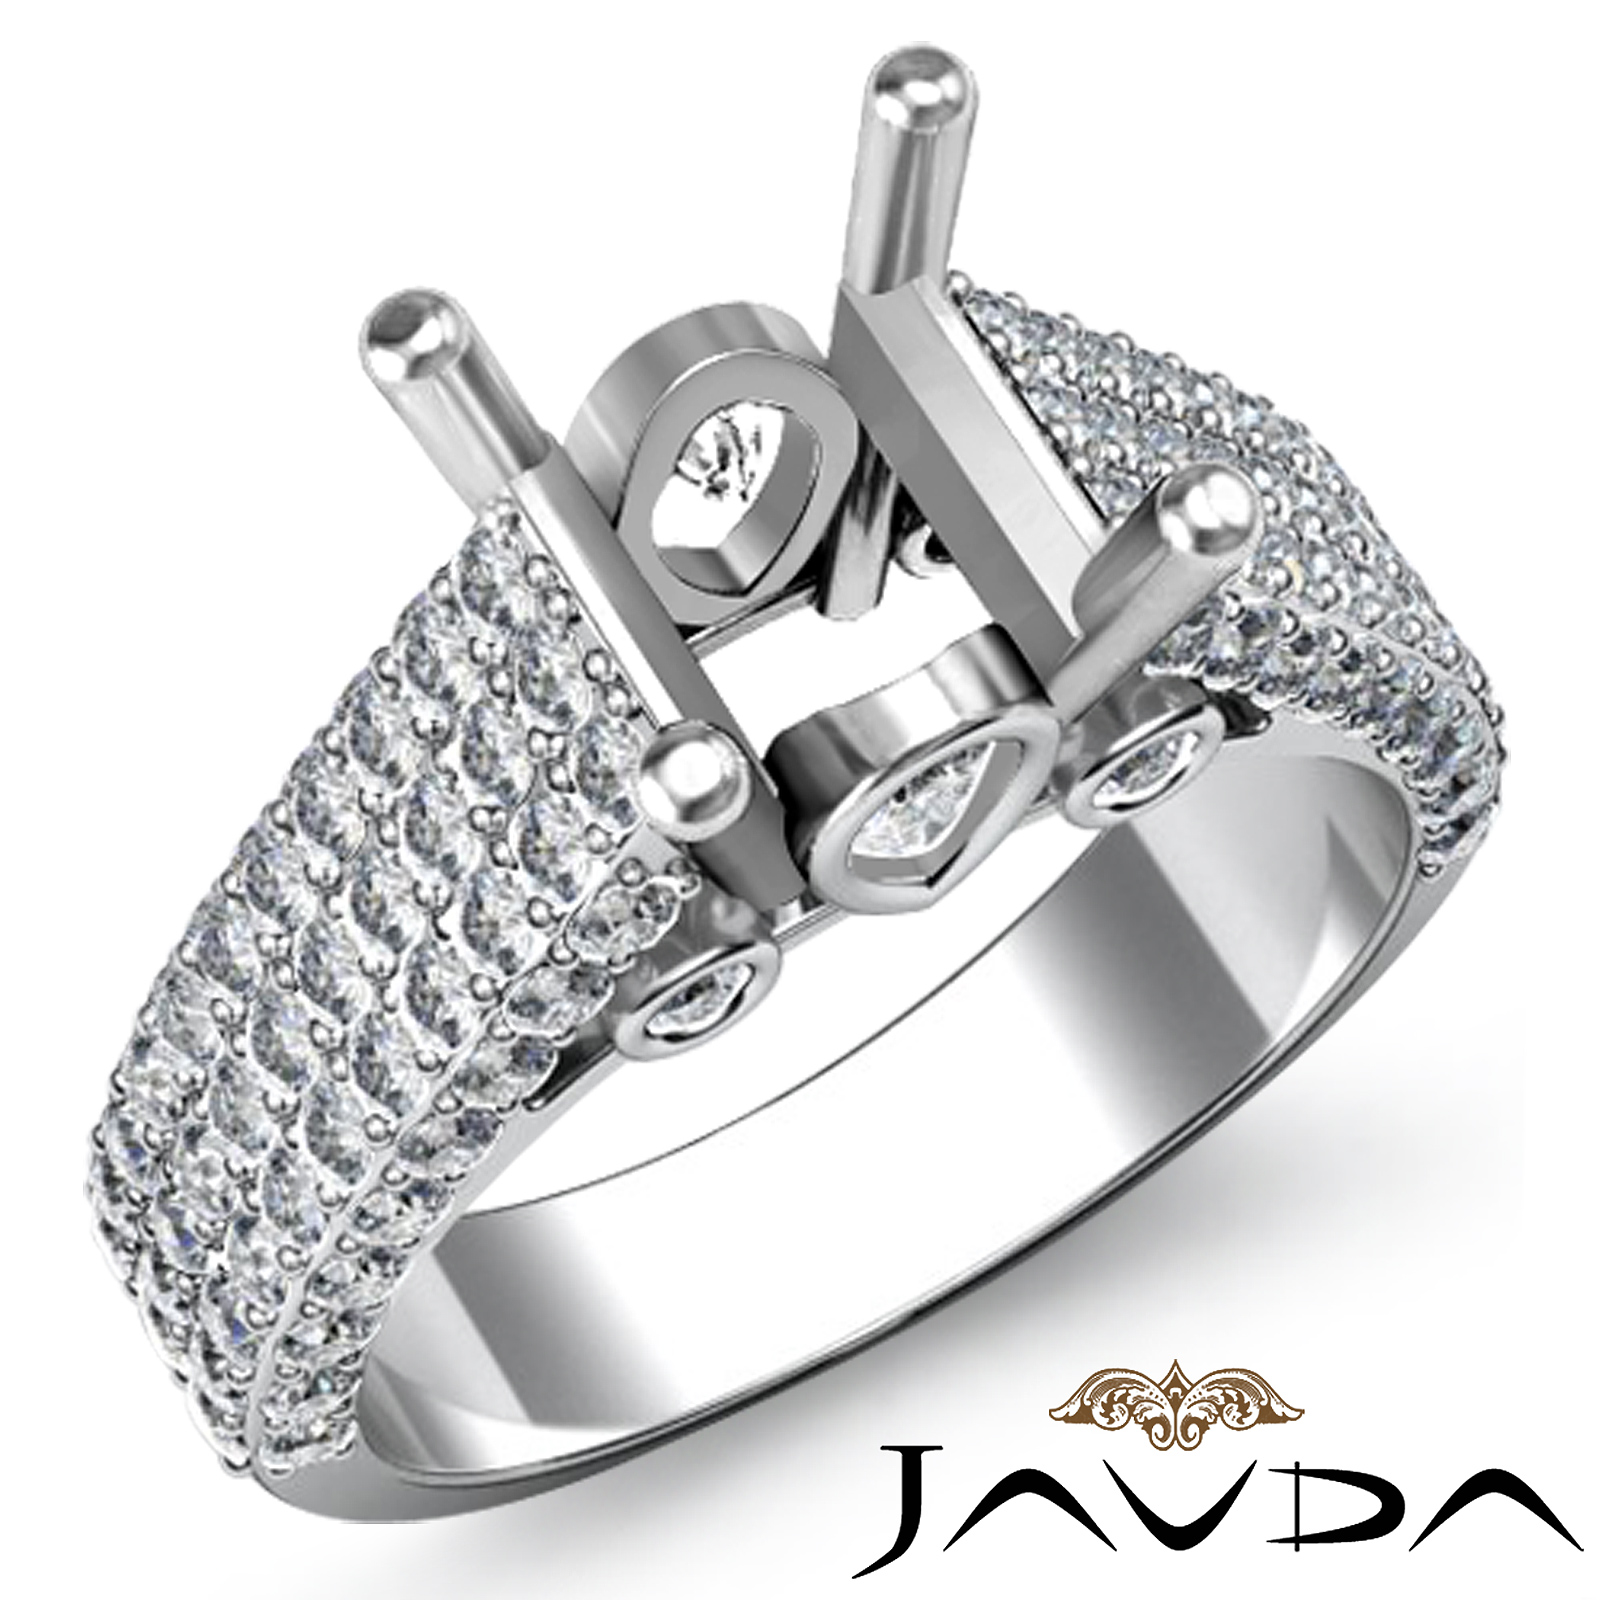 Shop Price Range_$4001 - $5000 Men's Rings at Jewelry Store in St. Thomas |  Beverly's Jewelry